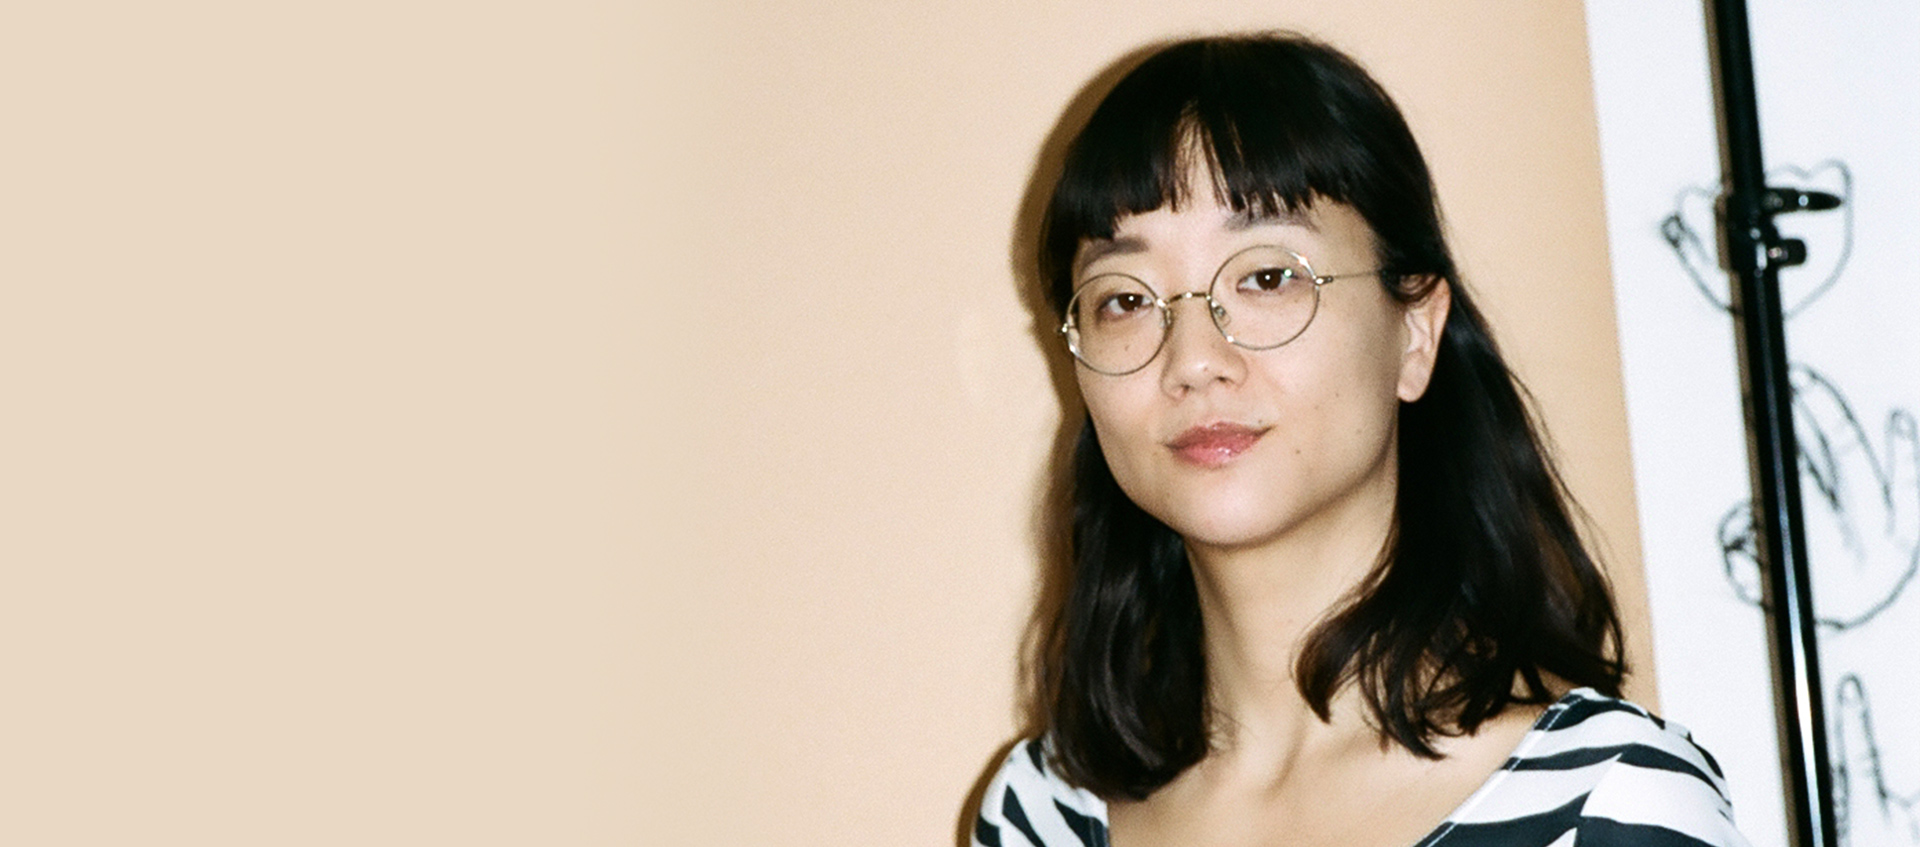 Photo of Christine Sun Kim in front of beige wall. Christine is wearing glasses and striped shirt